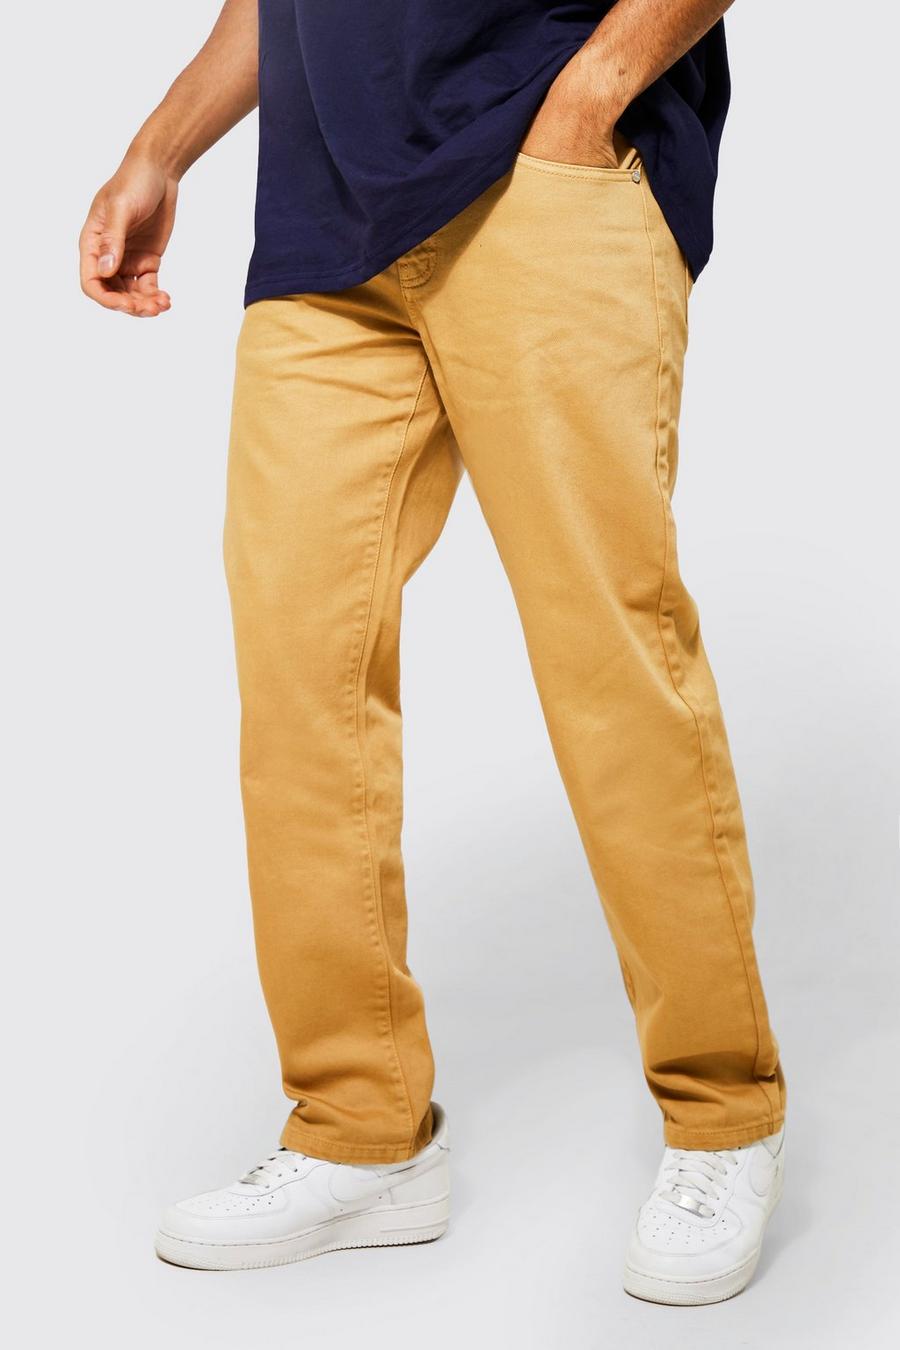 Tan braun Relaxed Fit Overdye Jeans